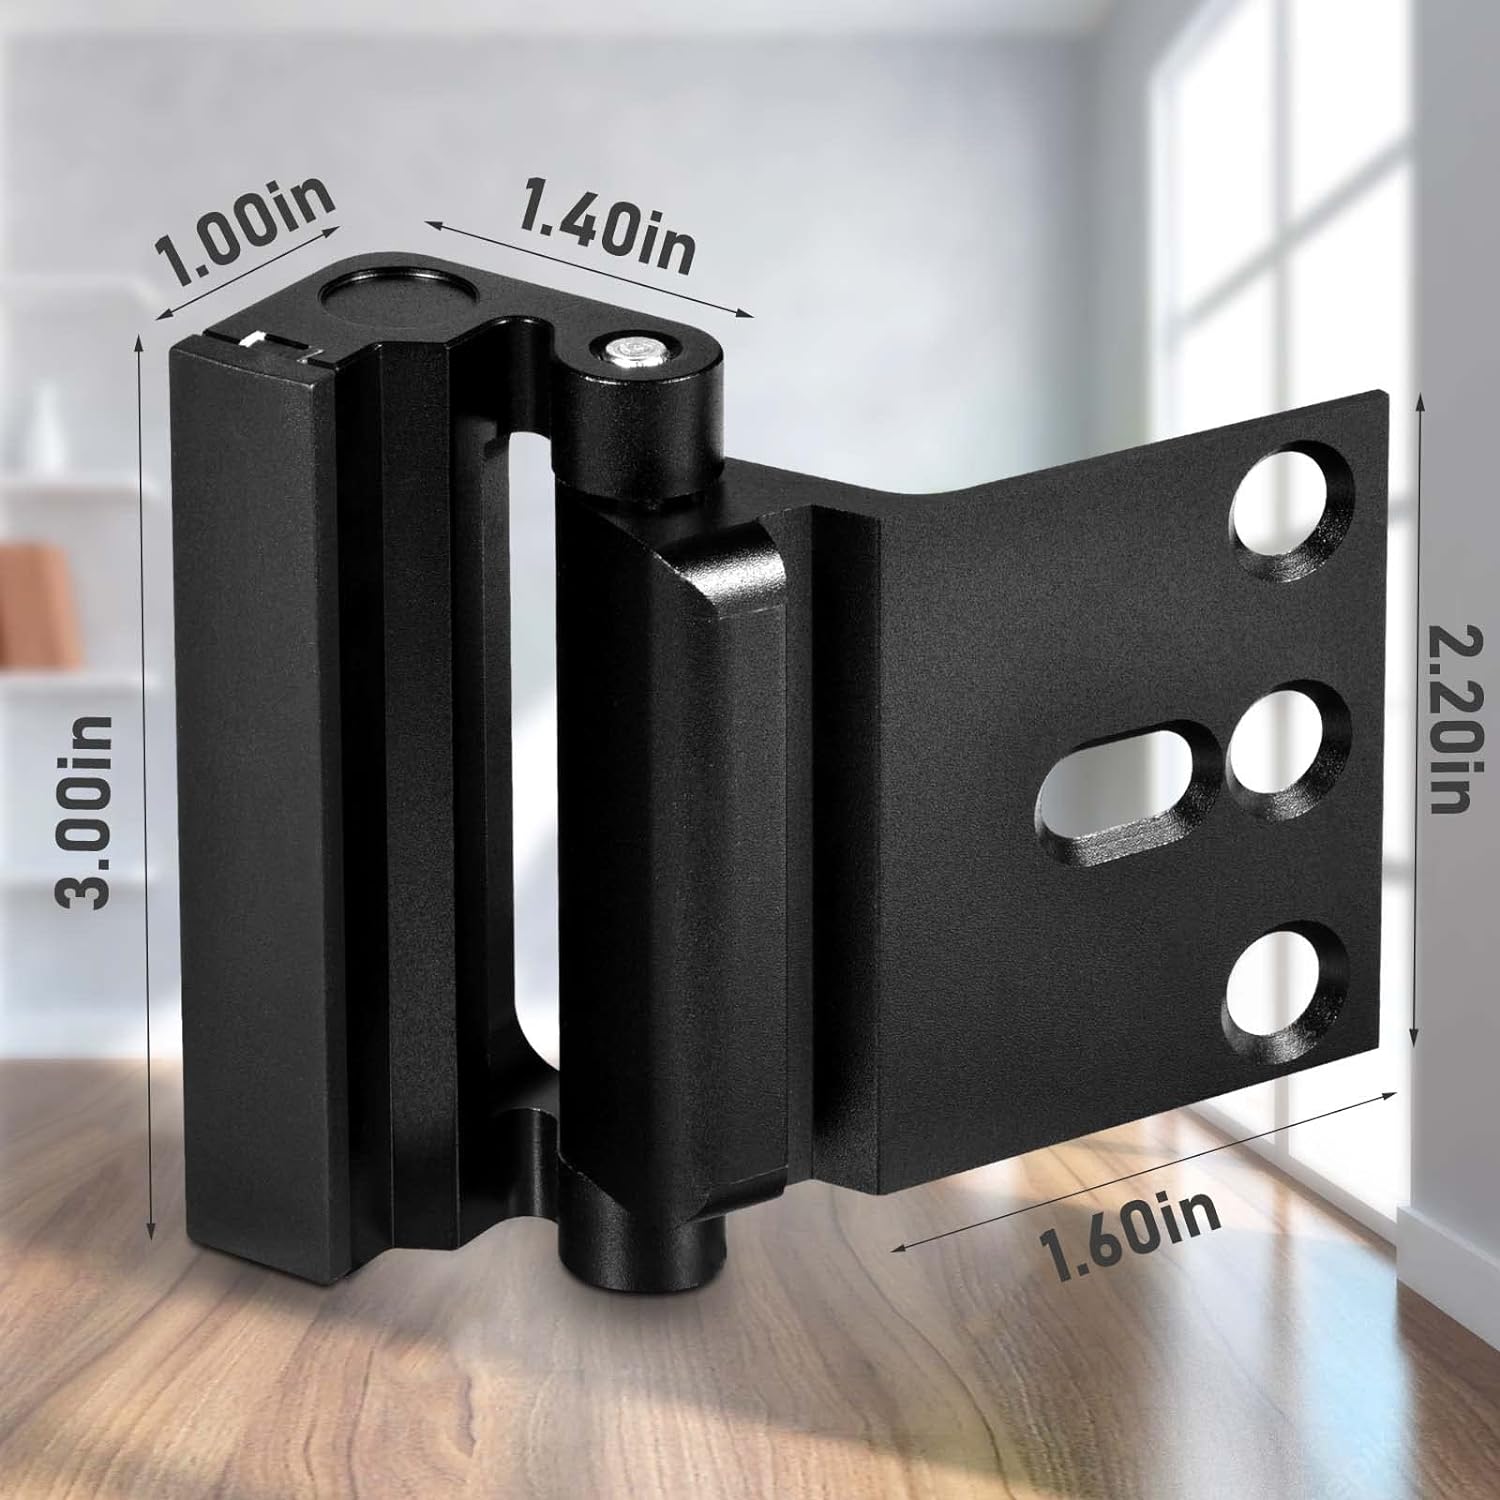 Steinwhale 3Pack Home Security Door Reinforcement Lock, Childproof Safety Door Lock Latch Inside Stopper, Add High Security to Prevent Home Unauthorized Entry, Aluminum Construction Finish Black